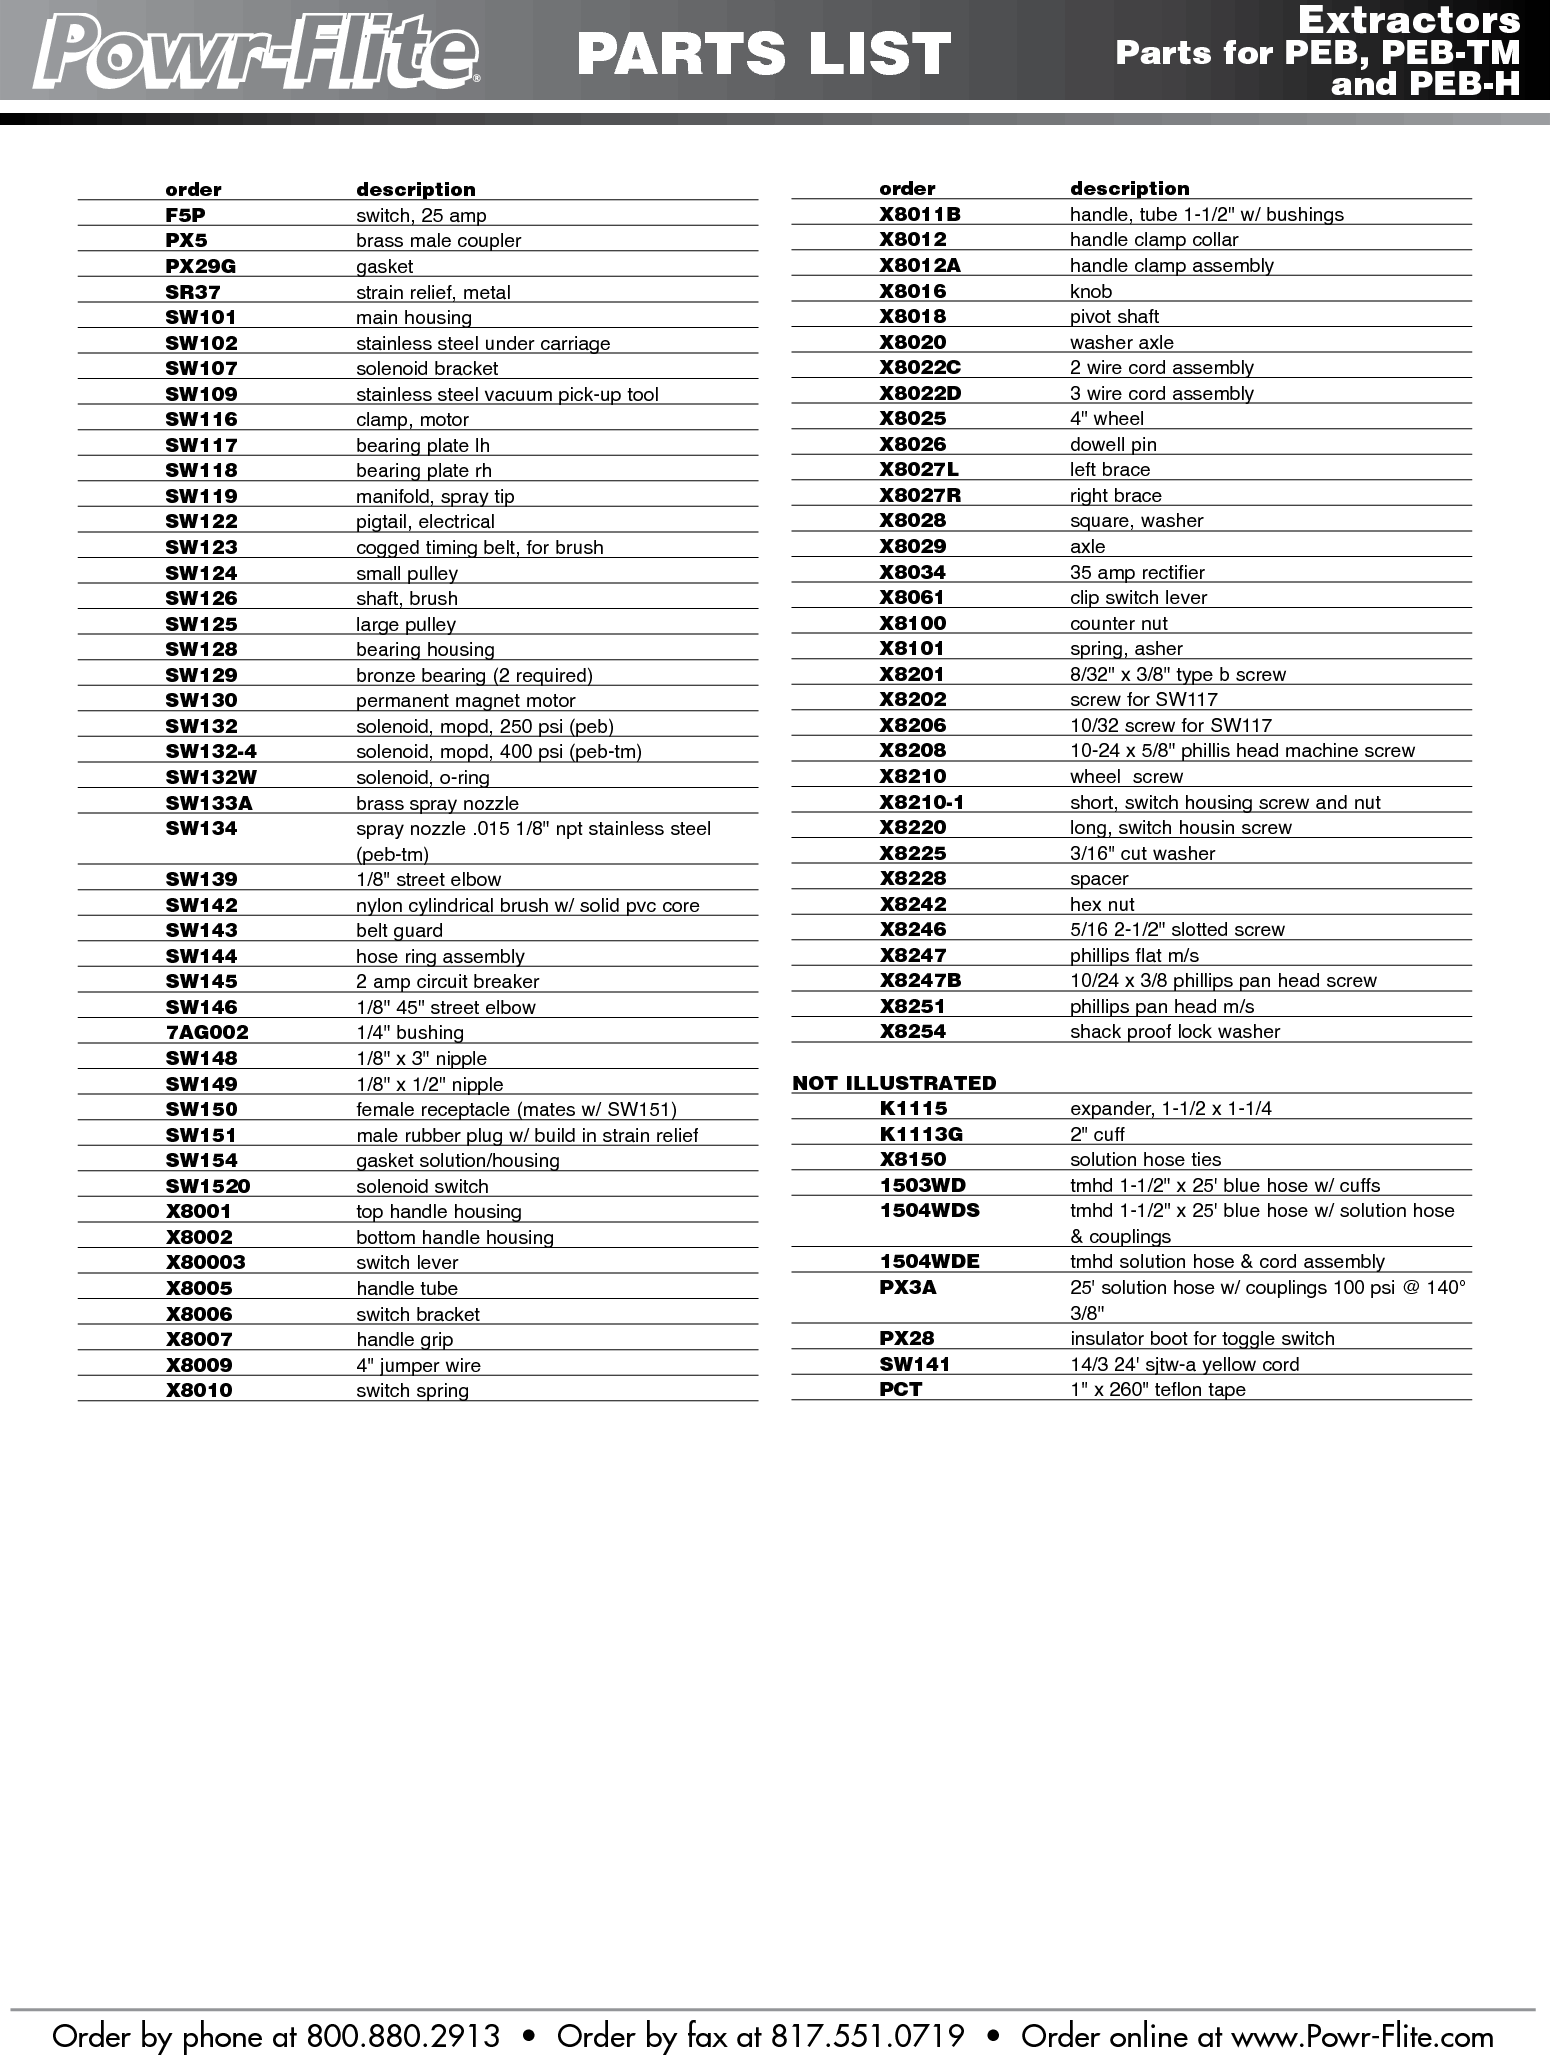 Page 2 of 2 - Sweepscrub Powr-Flite-Peb-Carpet-Extractor-Parts-List User Manual